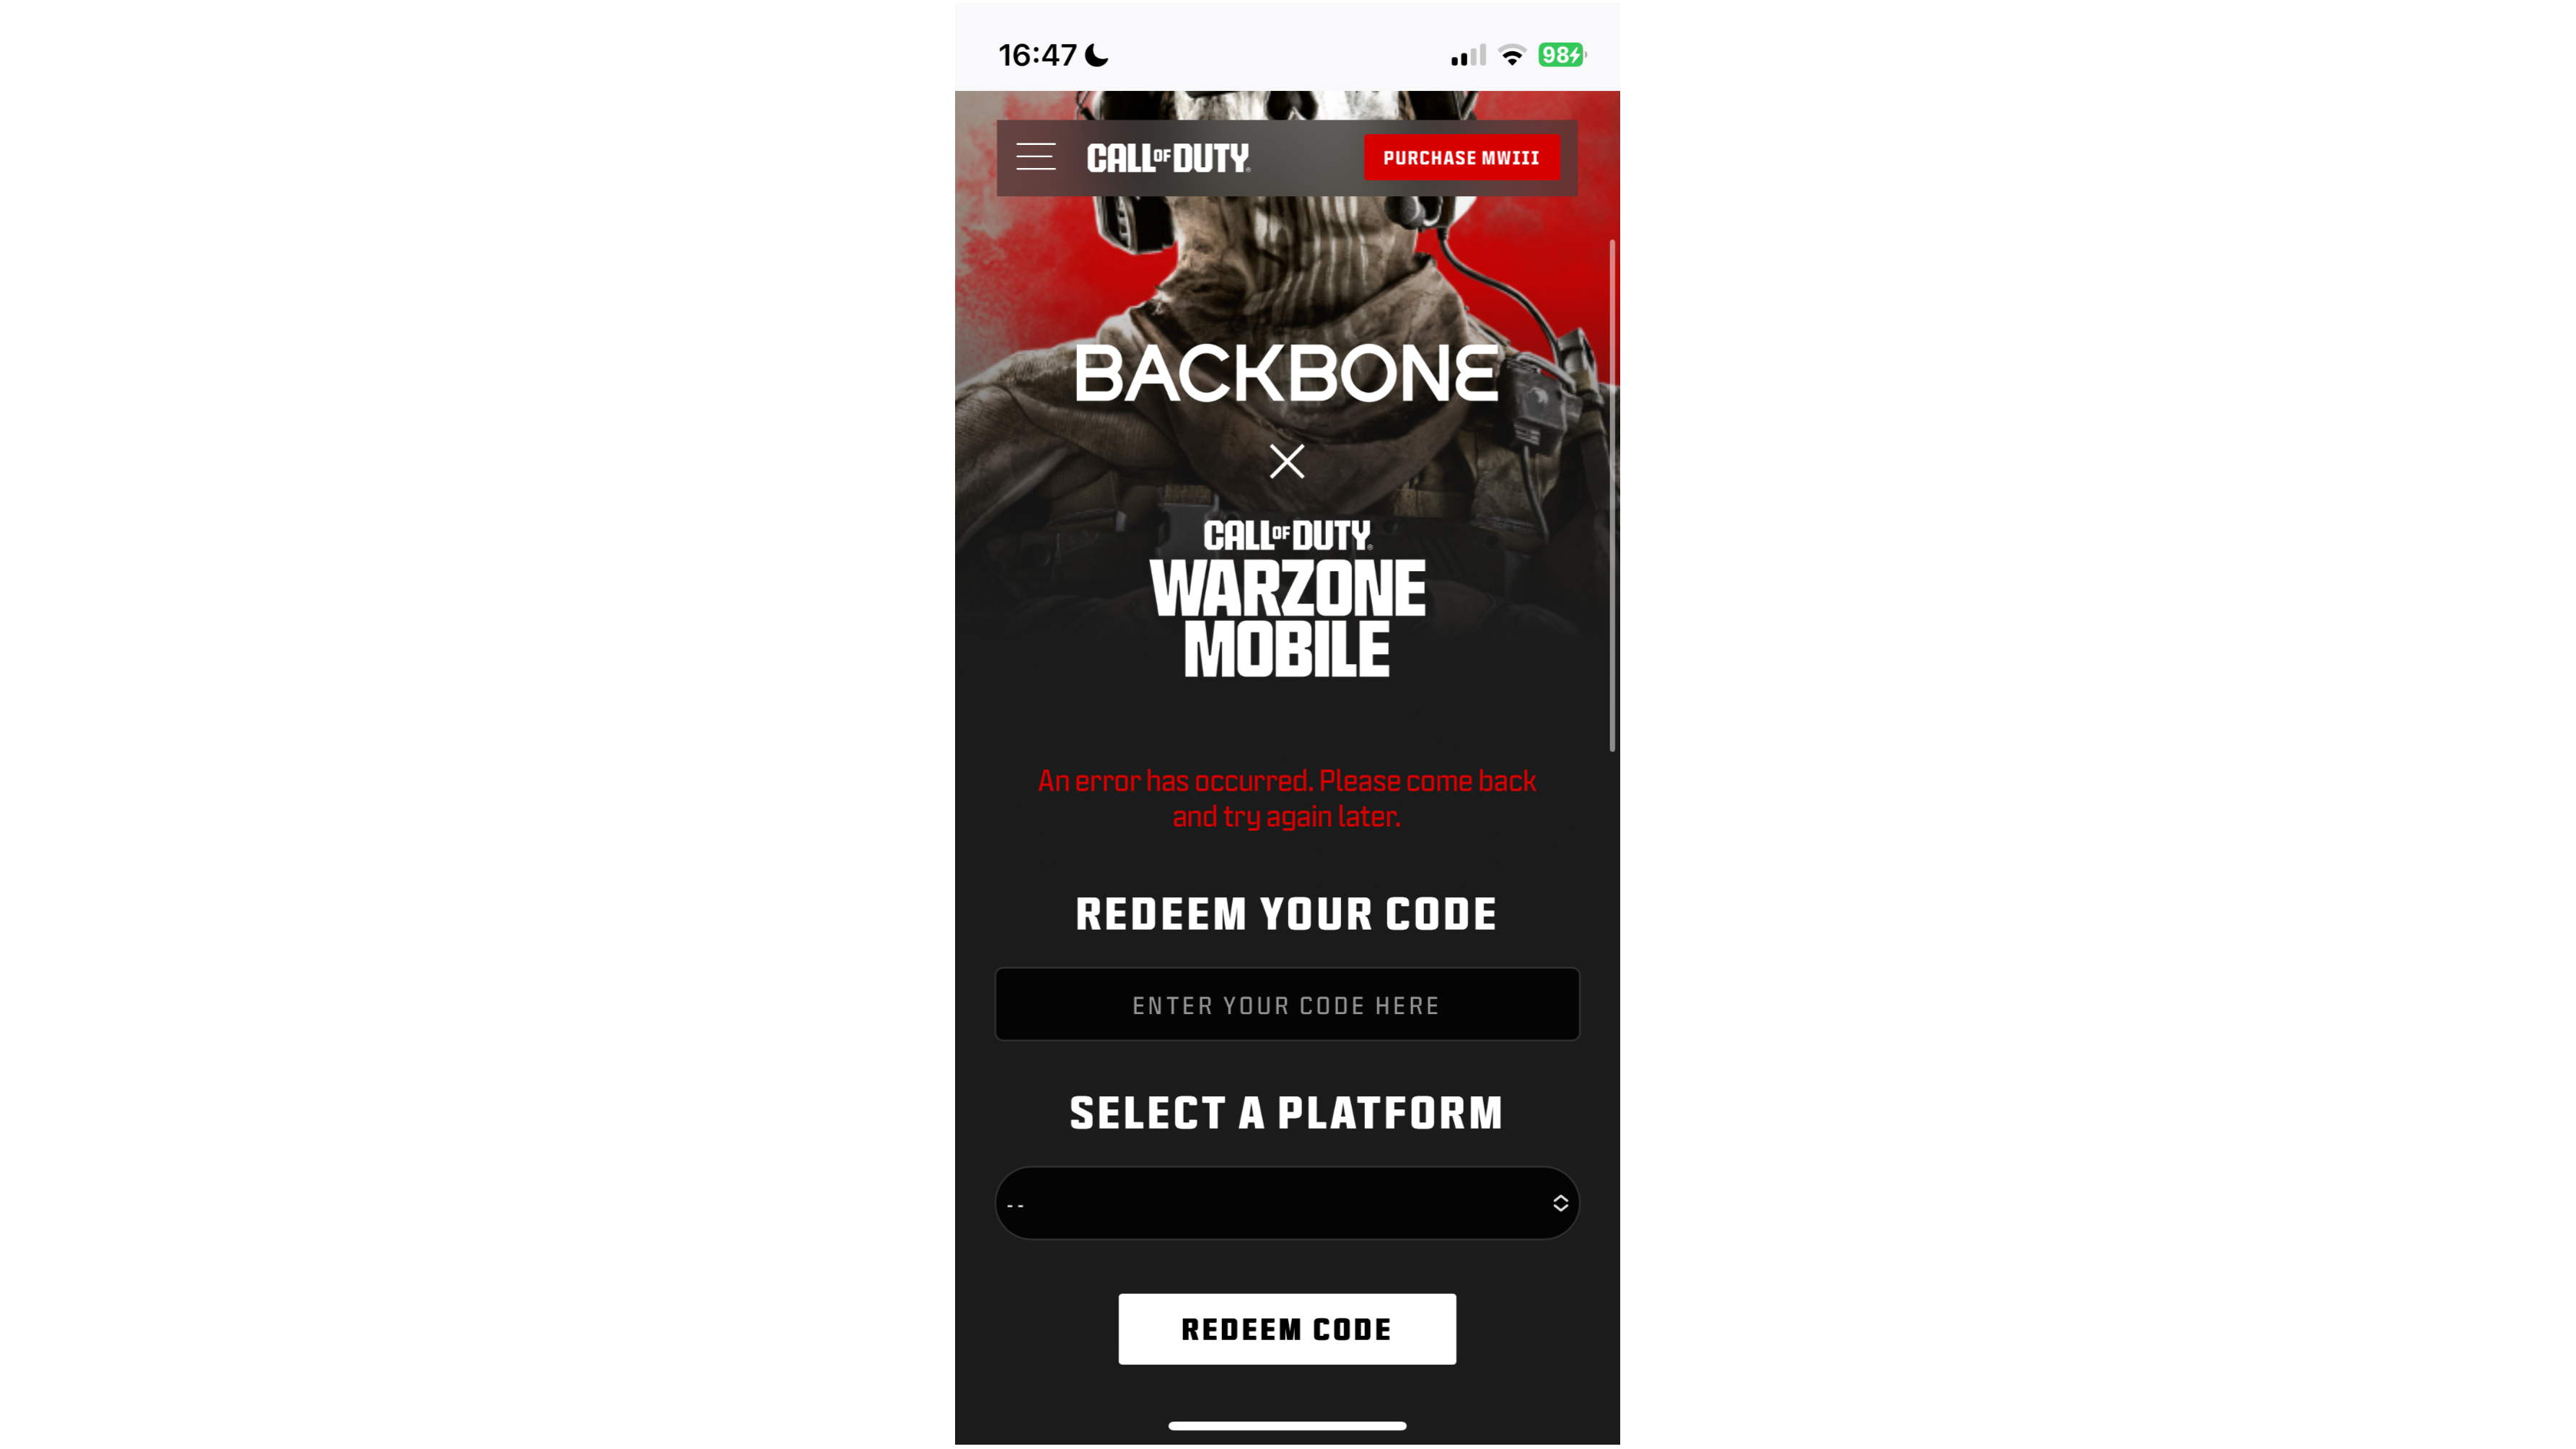 The Backbone code redemption page.